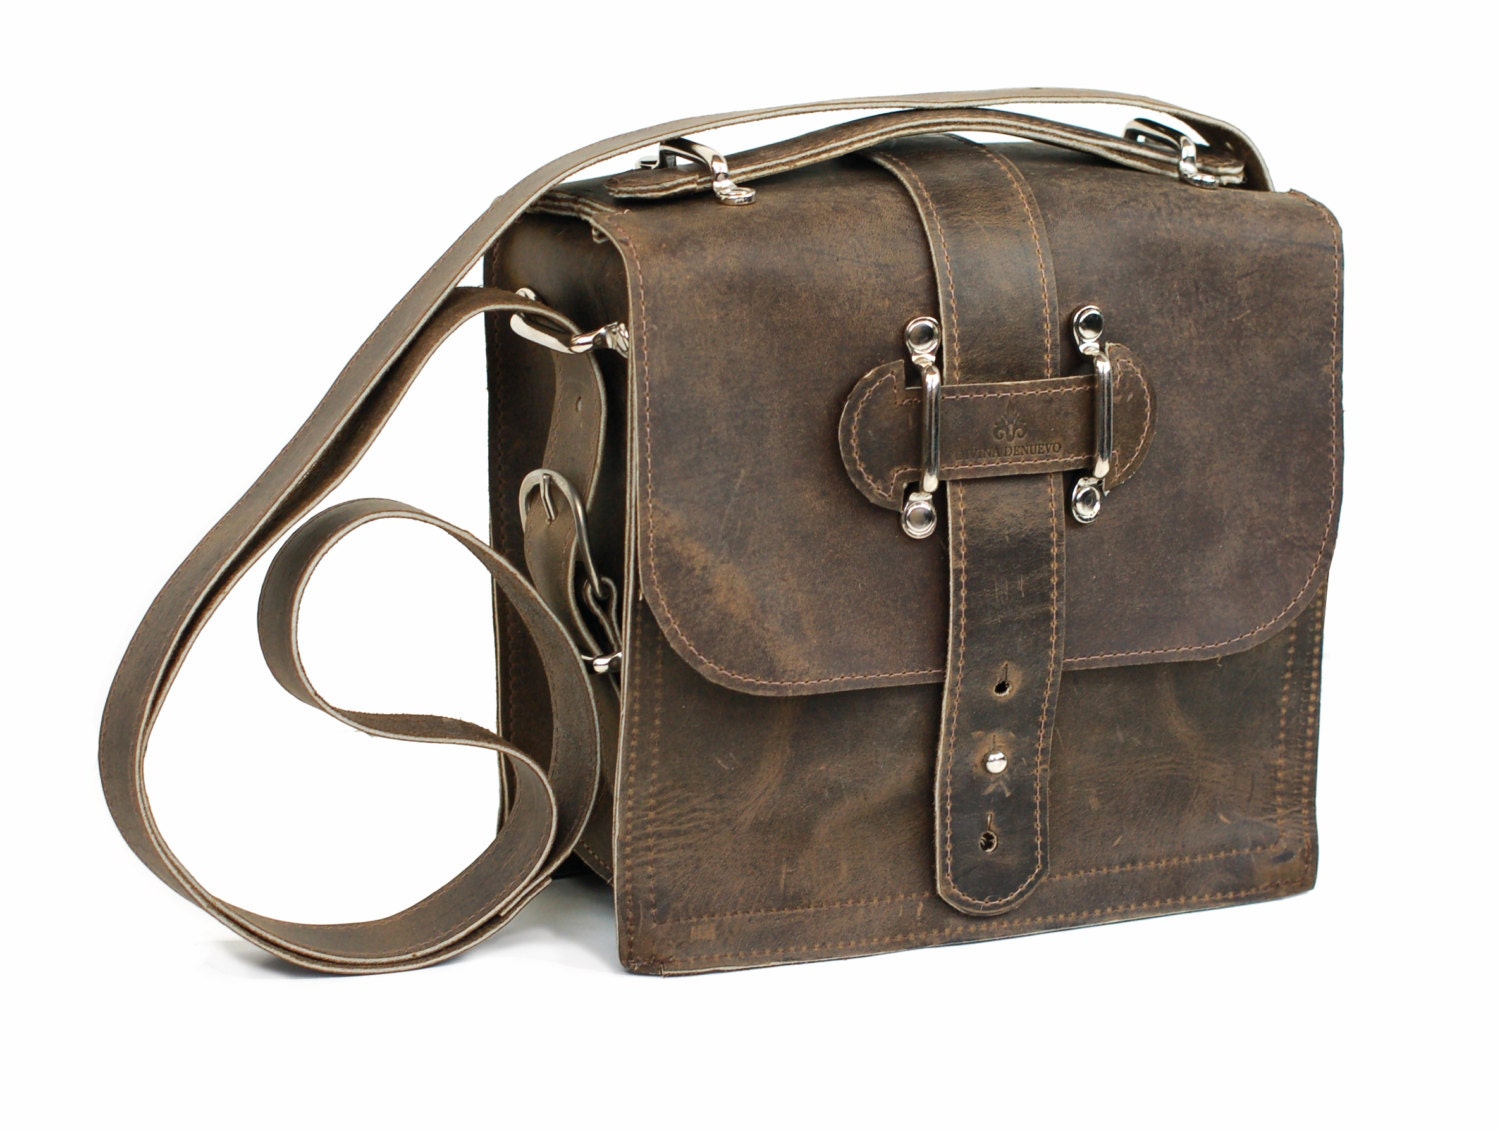 Distressed Brown Leather Satchel Urban Every Day Leather Bag